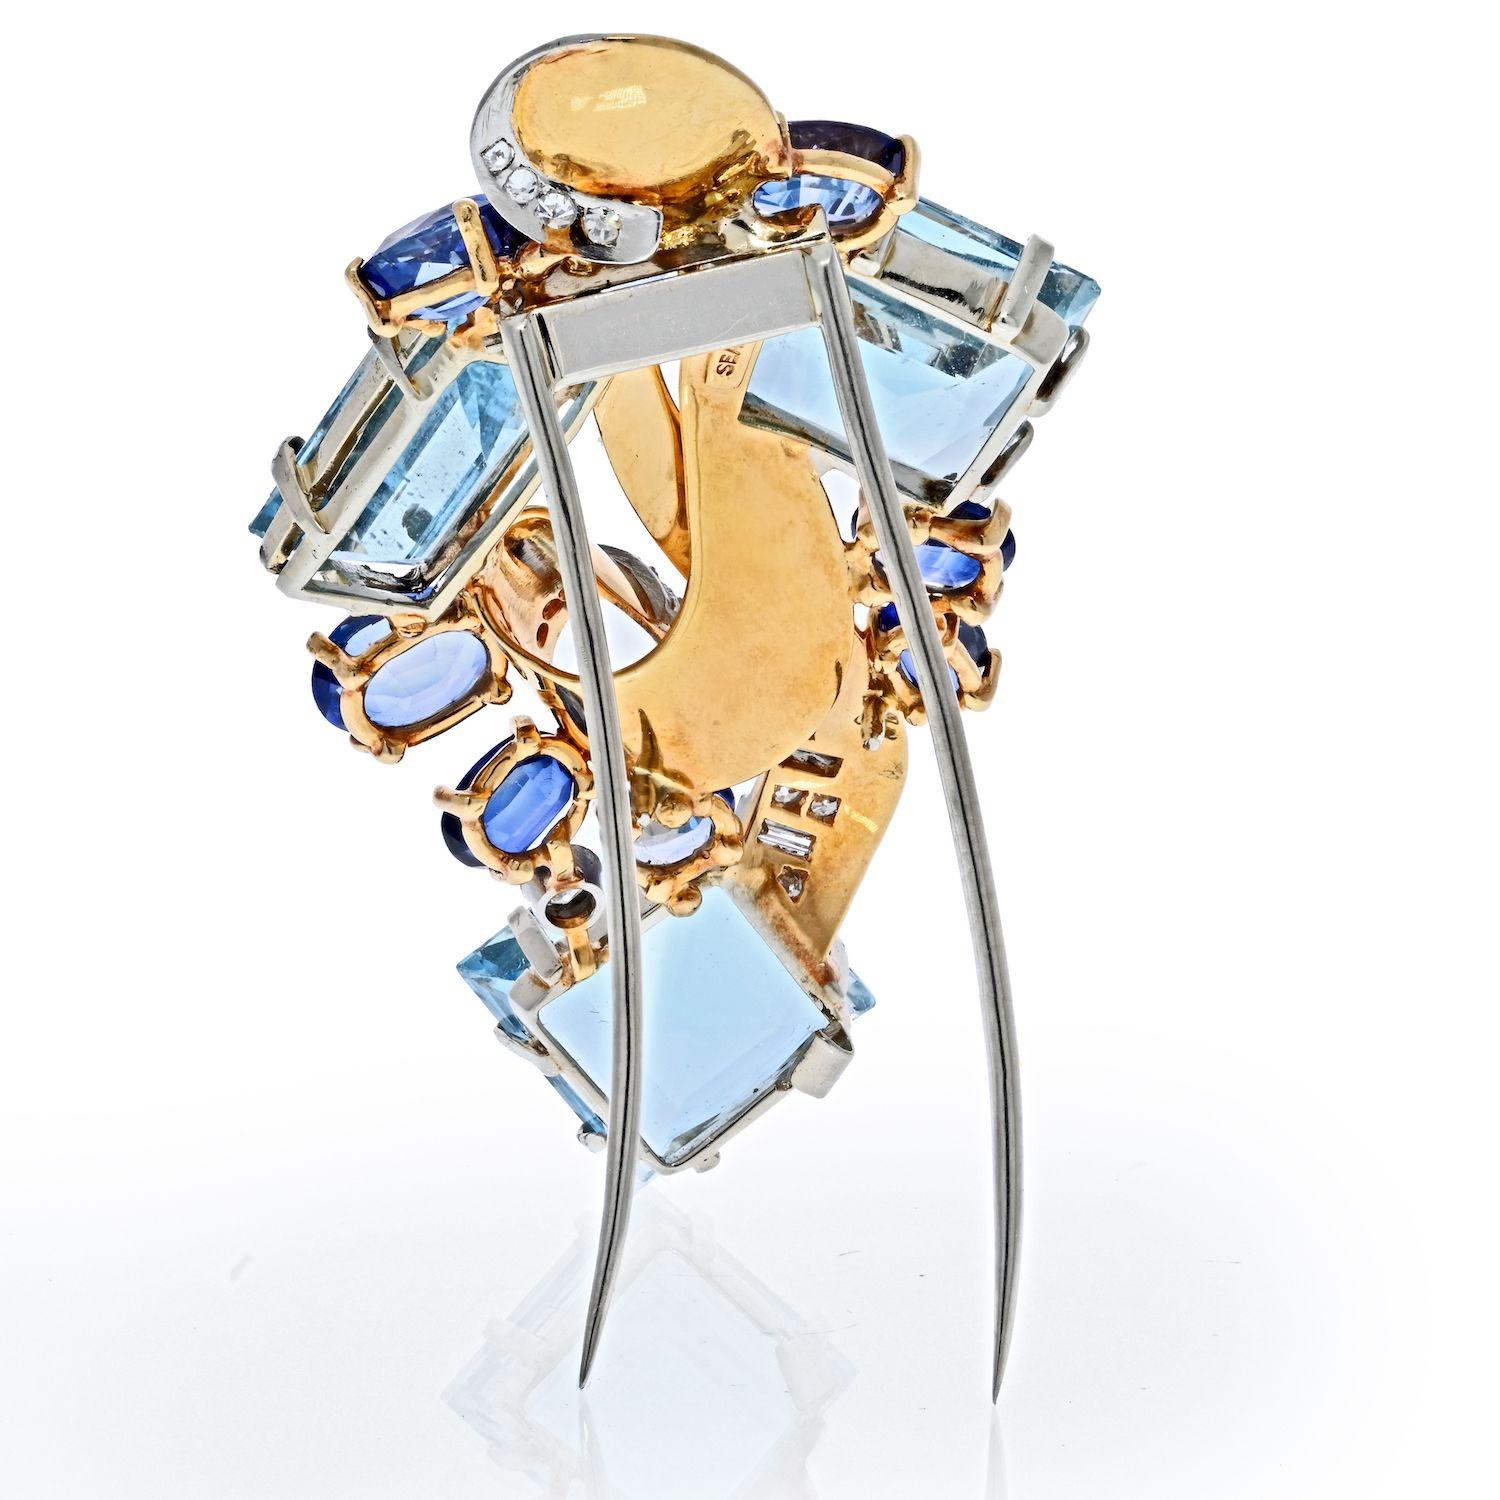 Beautiful and somewhat geometric this brooch by Seaman Schepps circa 1940's is masterfully crafted in 14K gold, featuring aquamarines, sapphires and diamonds. There are plenty of ways to dress this brooch up or down. One thing we know you will love